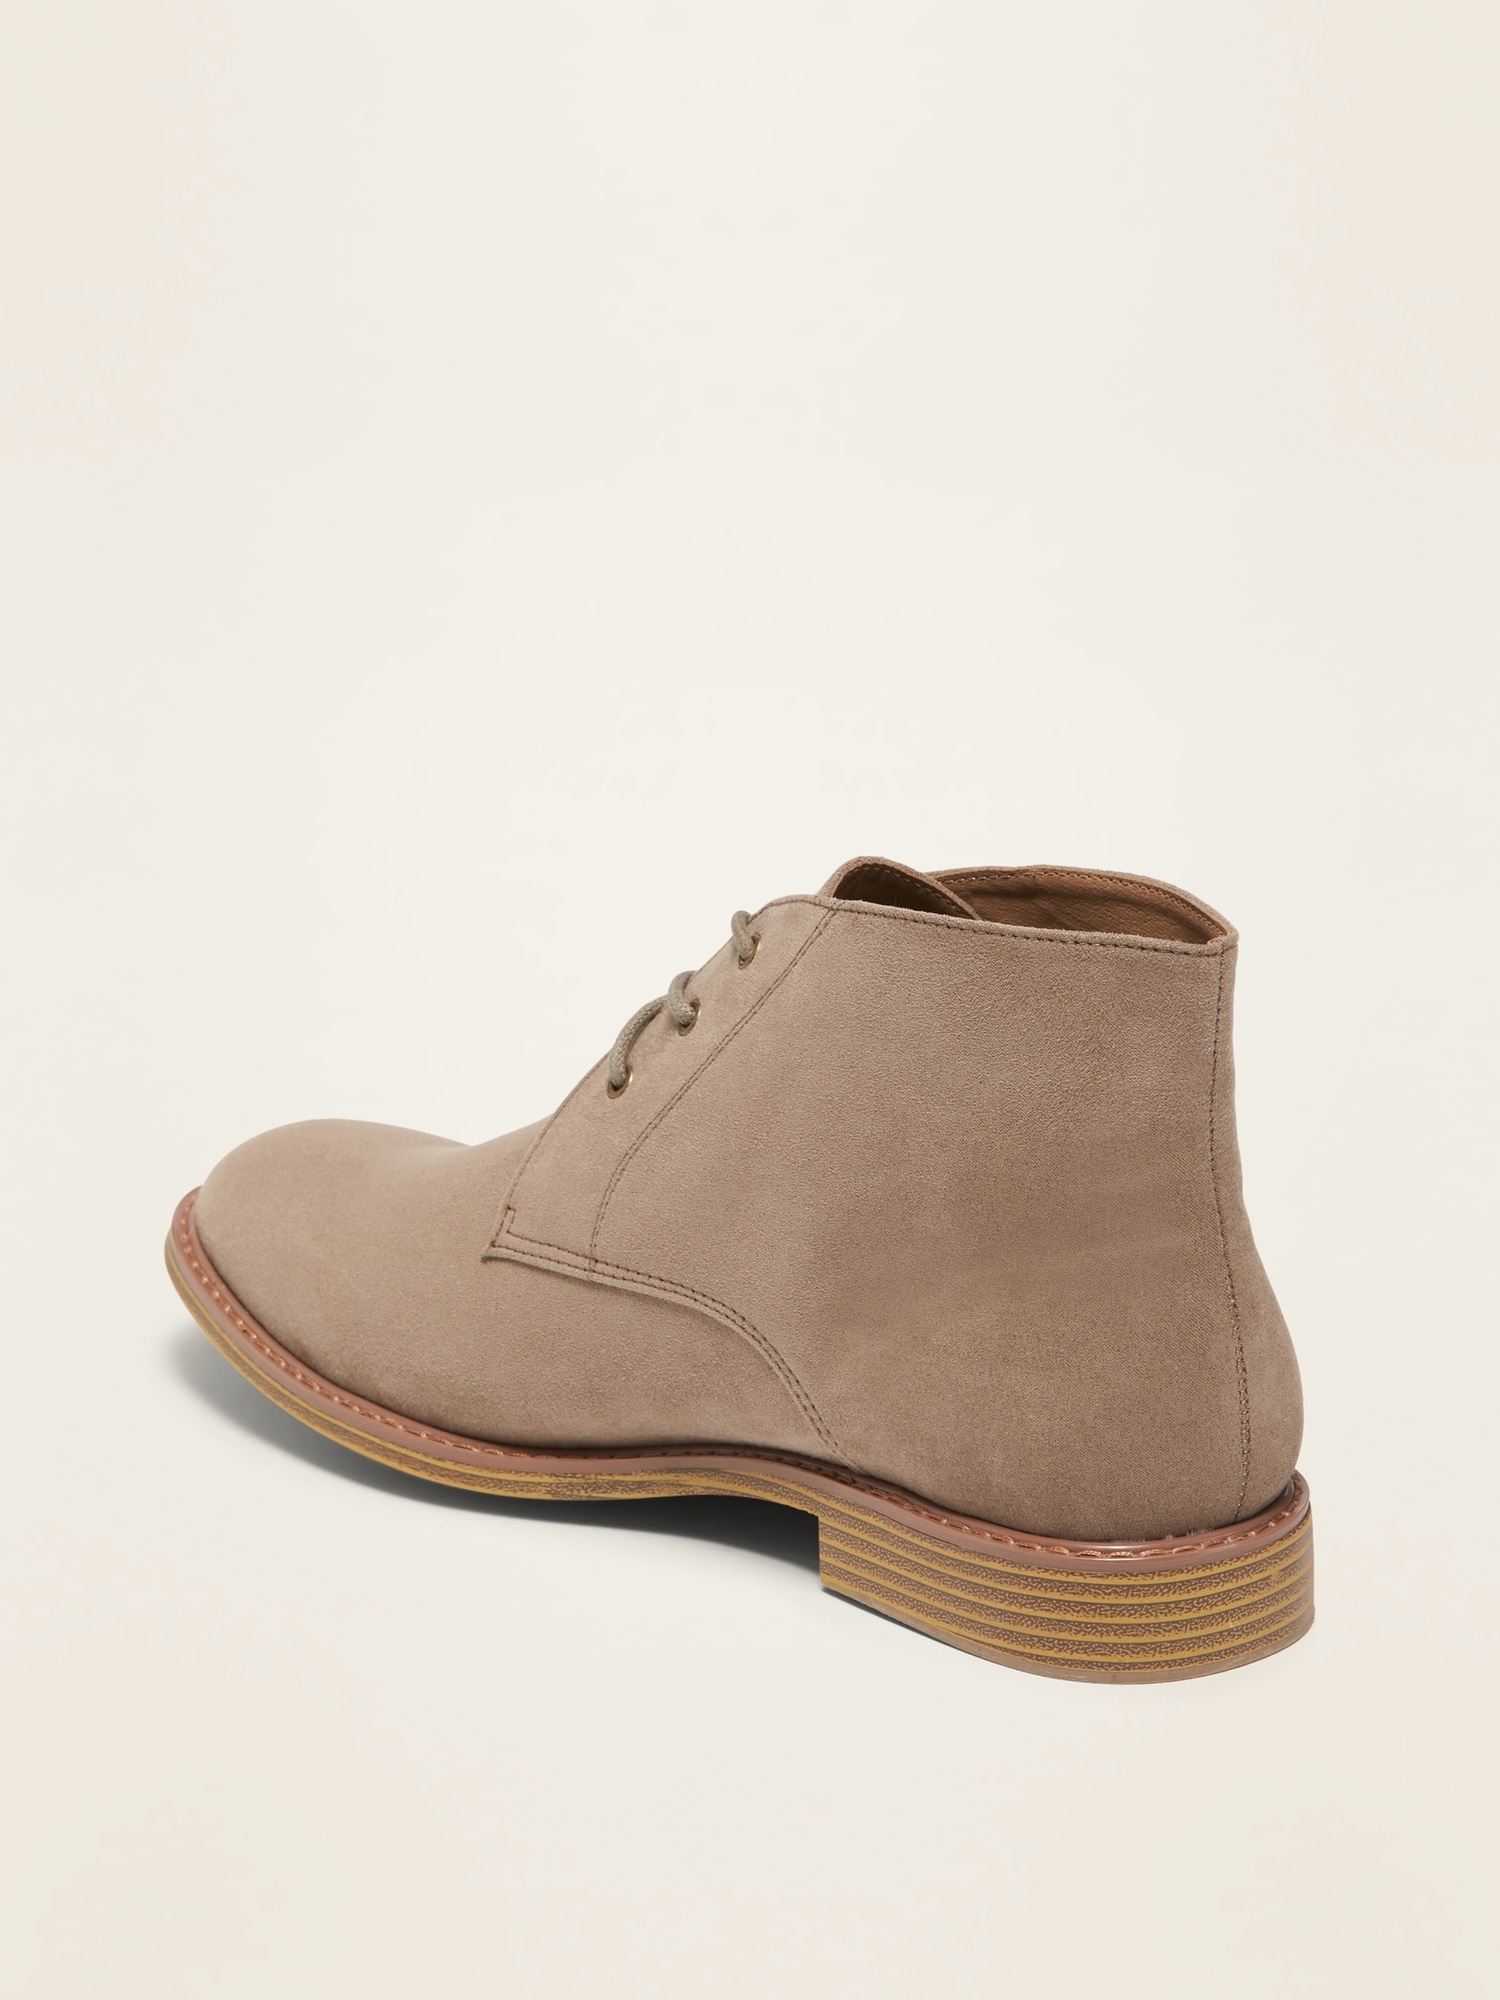 grey suede chukka boots mens